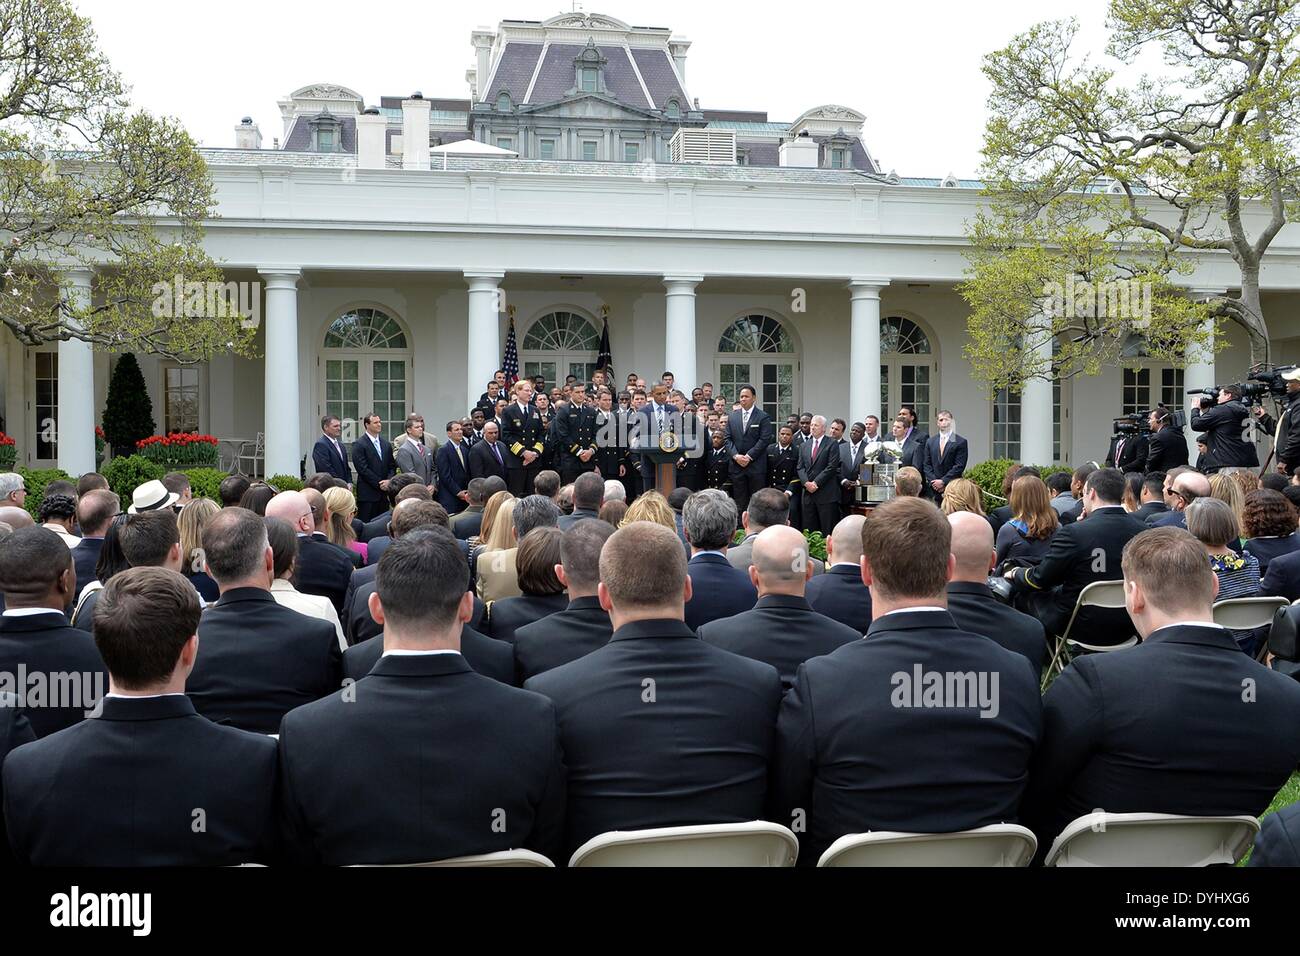 US President Barack Obama congratulates the US Naval Academy football team during an event on the South Lawn of the White House April 18, 2014 in Washington, D.C. The president presented the Navy Midshipmen with the Commander-in-Chief's Trophy, which goes to the Department of Defense academy team with the most victories against its Service rivals. Stock Photo